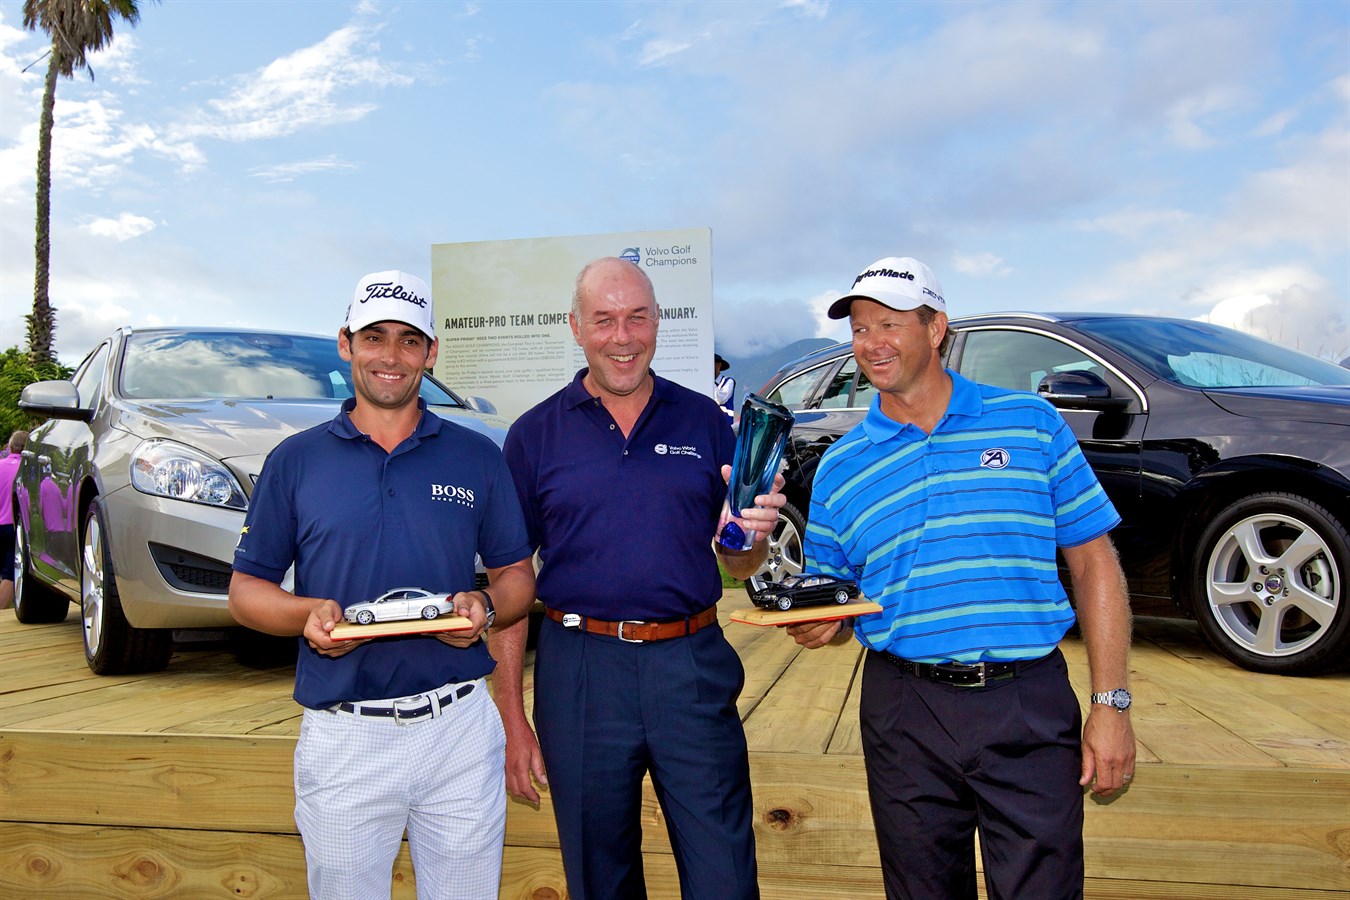 Lee Slattery (Pro), Mark Vandenberghe (Amateur) and Retief Goosen (Pro) – the winning team in the Amateur-Pro Team Competition